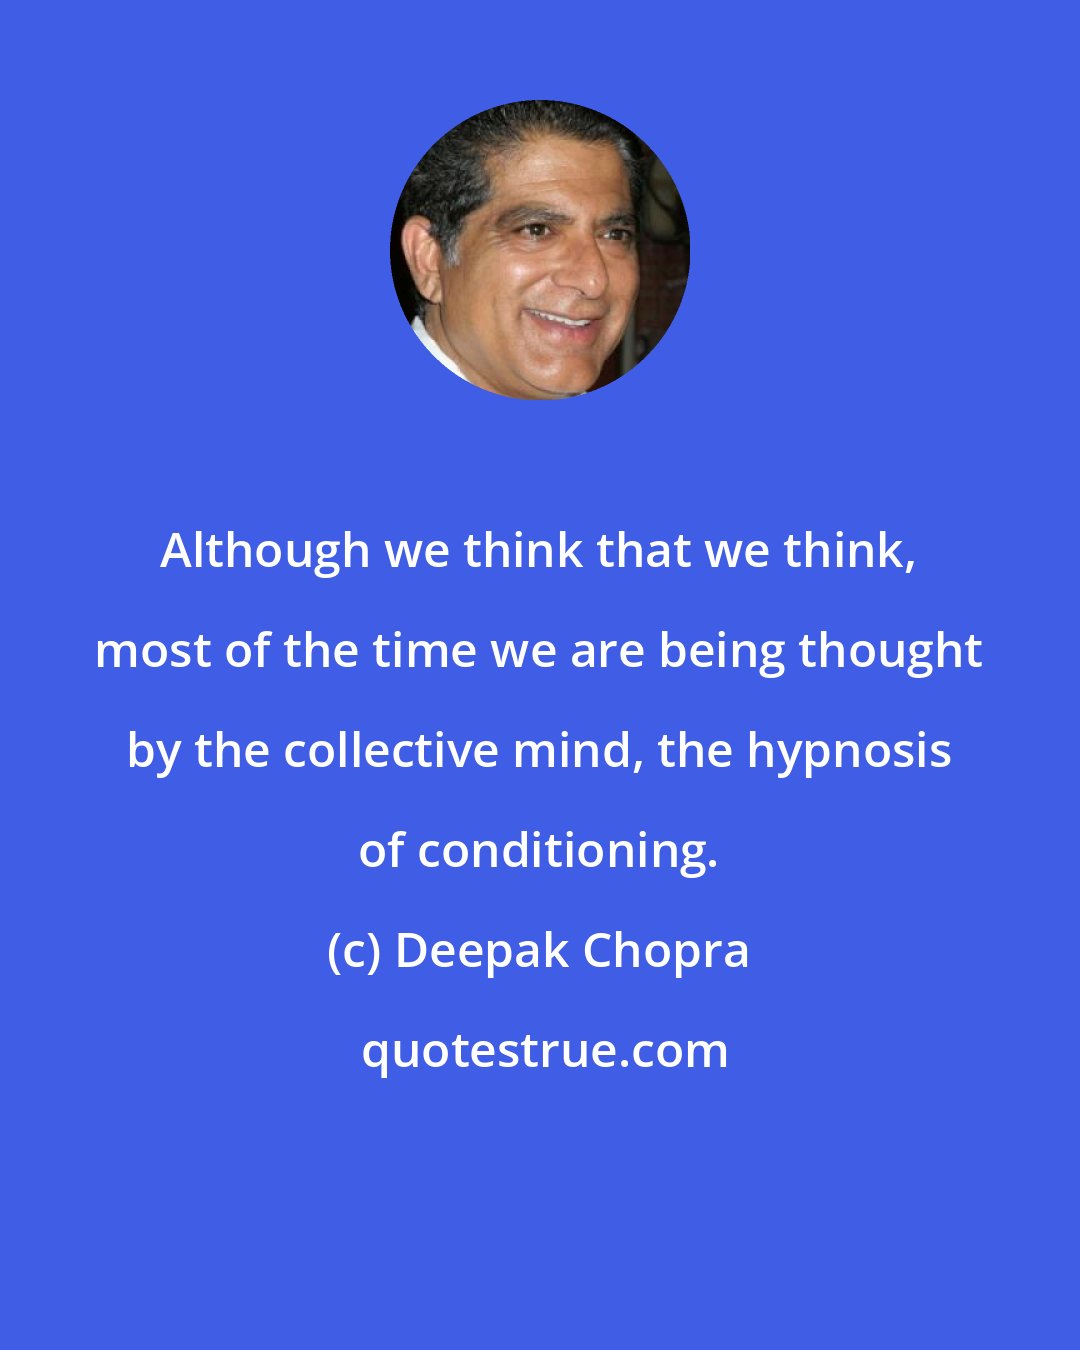 Deepak Chopra: Although we think that we think, most of the time we are being thought by the collective mind, the hypnosis of conditioning.